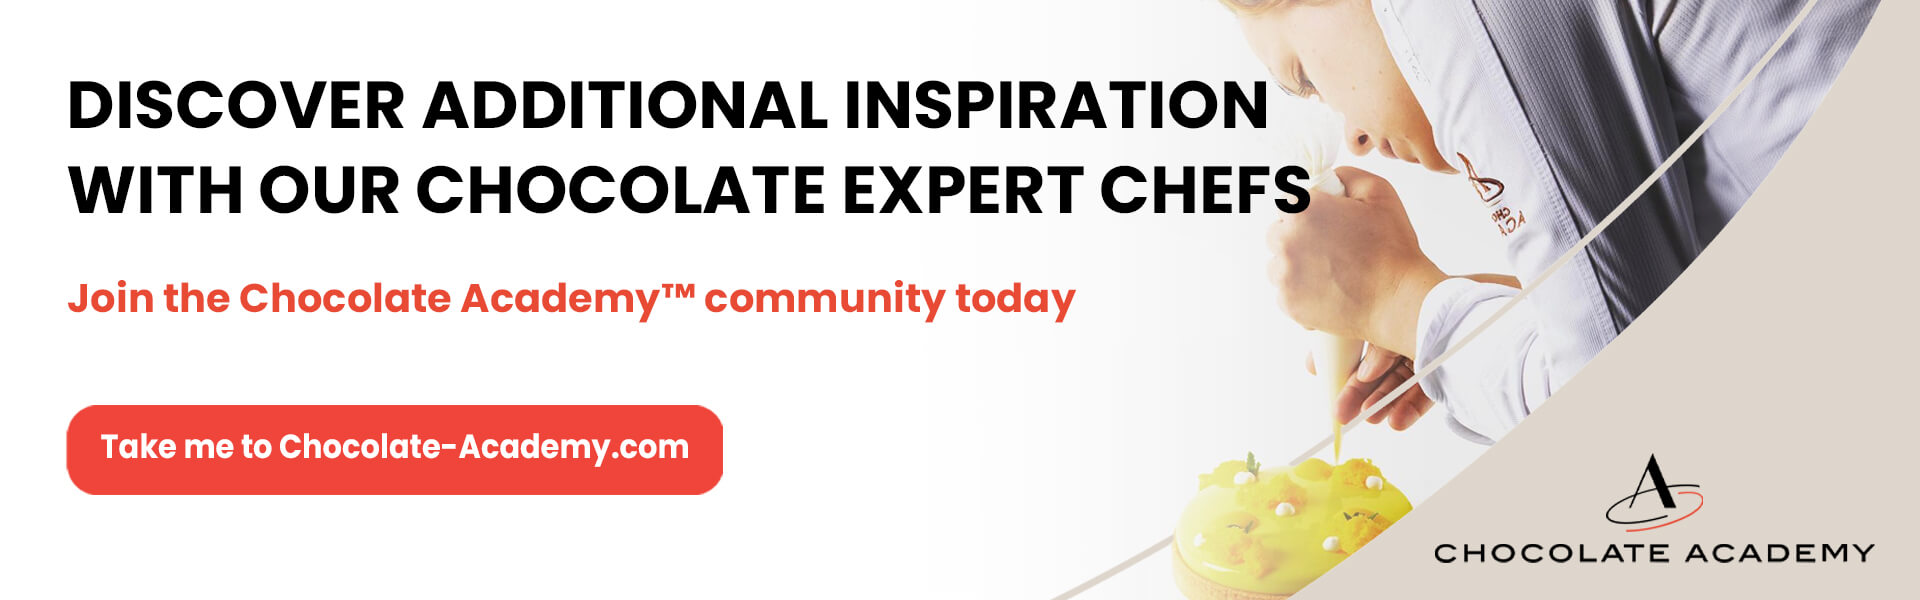 Discover additional inspiration with our chocolate expert chefs / Join the Chocolate Academy™ community today